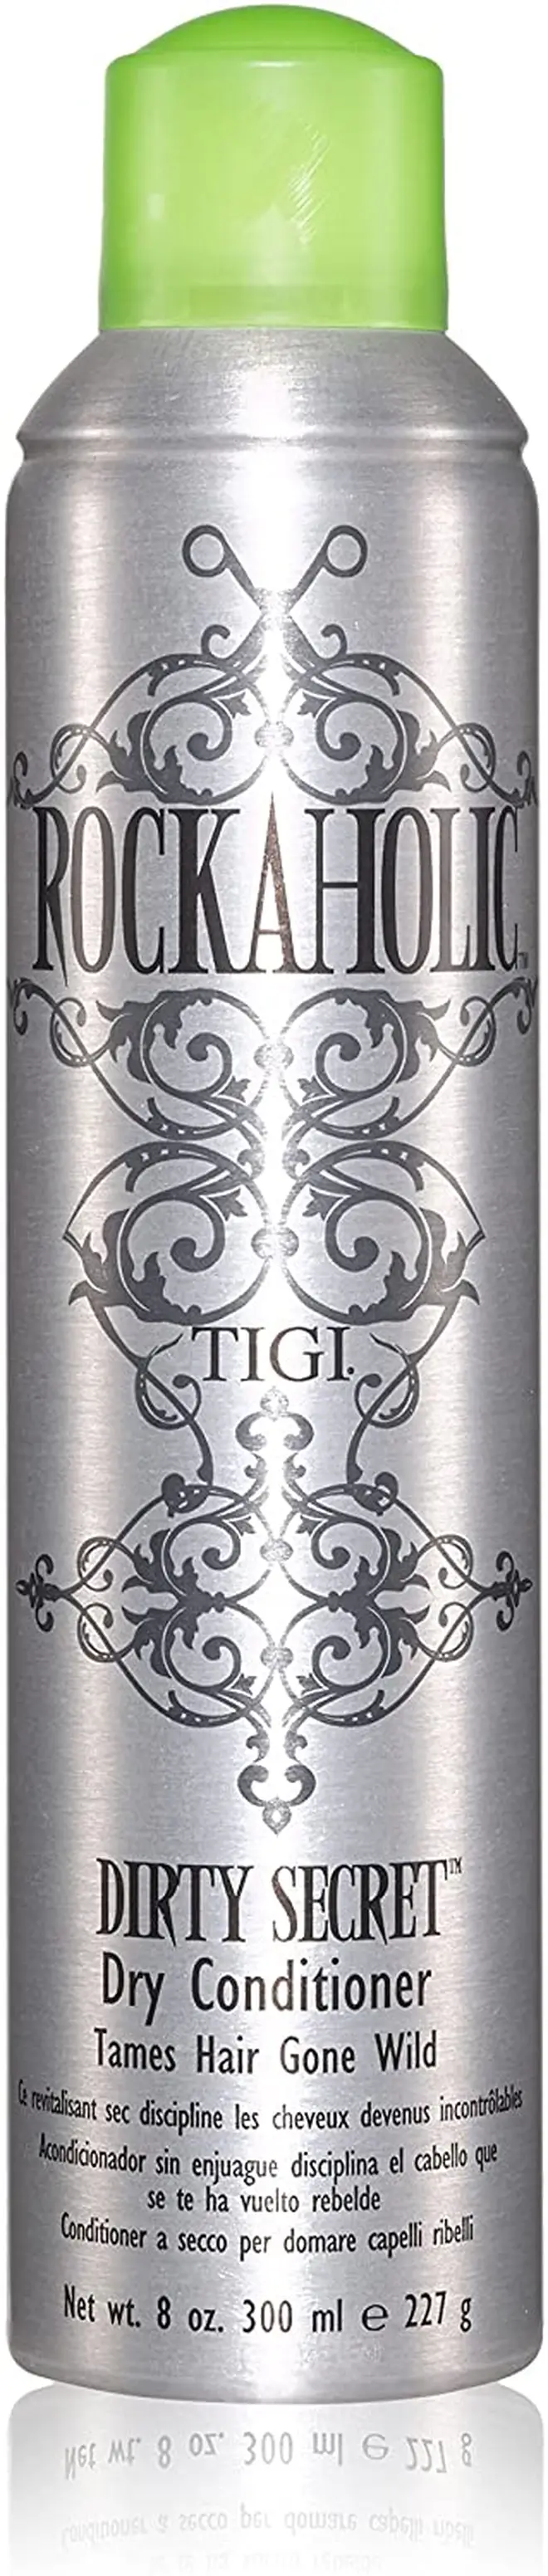 TIGI's dry conditioner is something different to try, and it smells like heaven